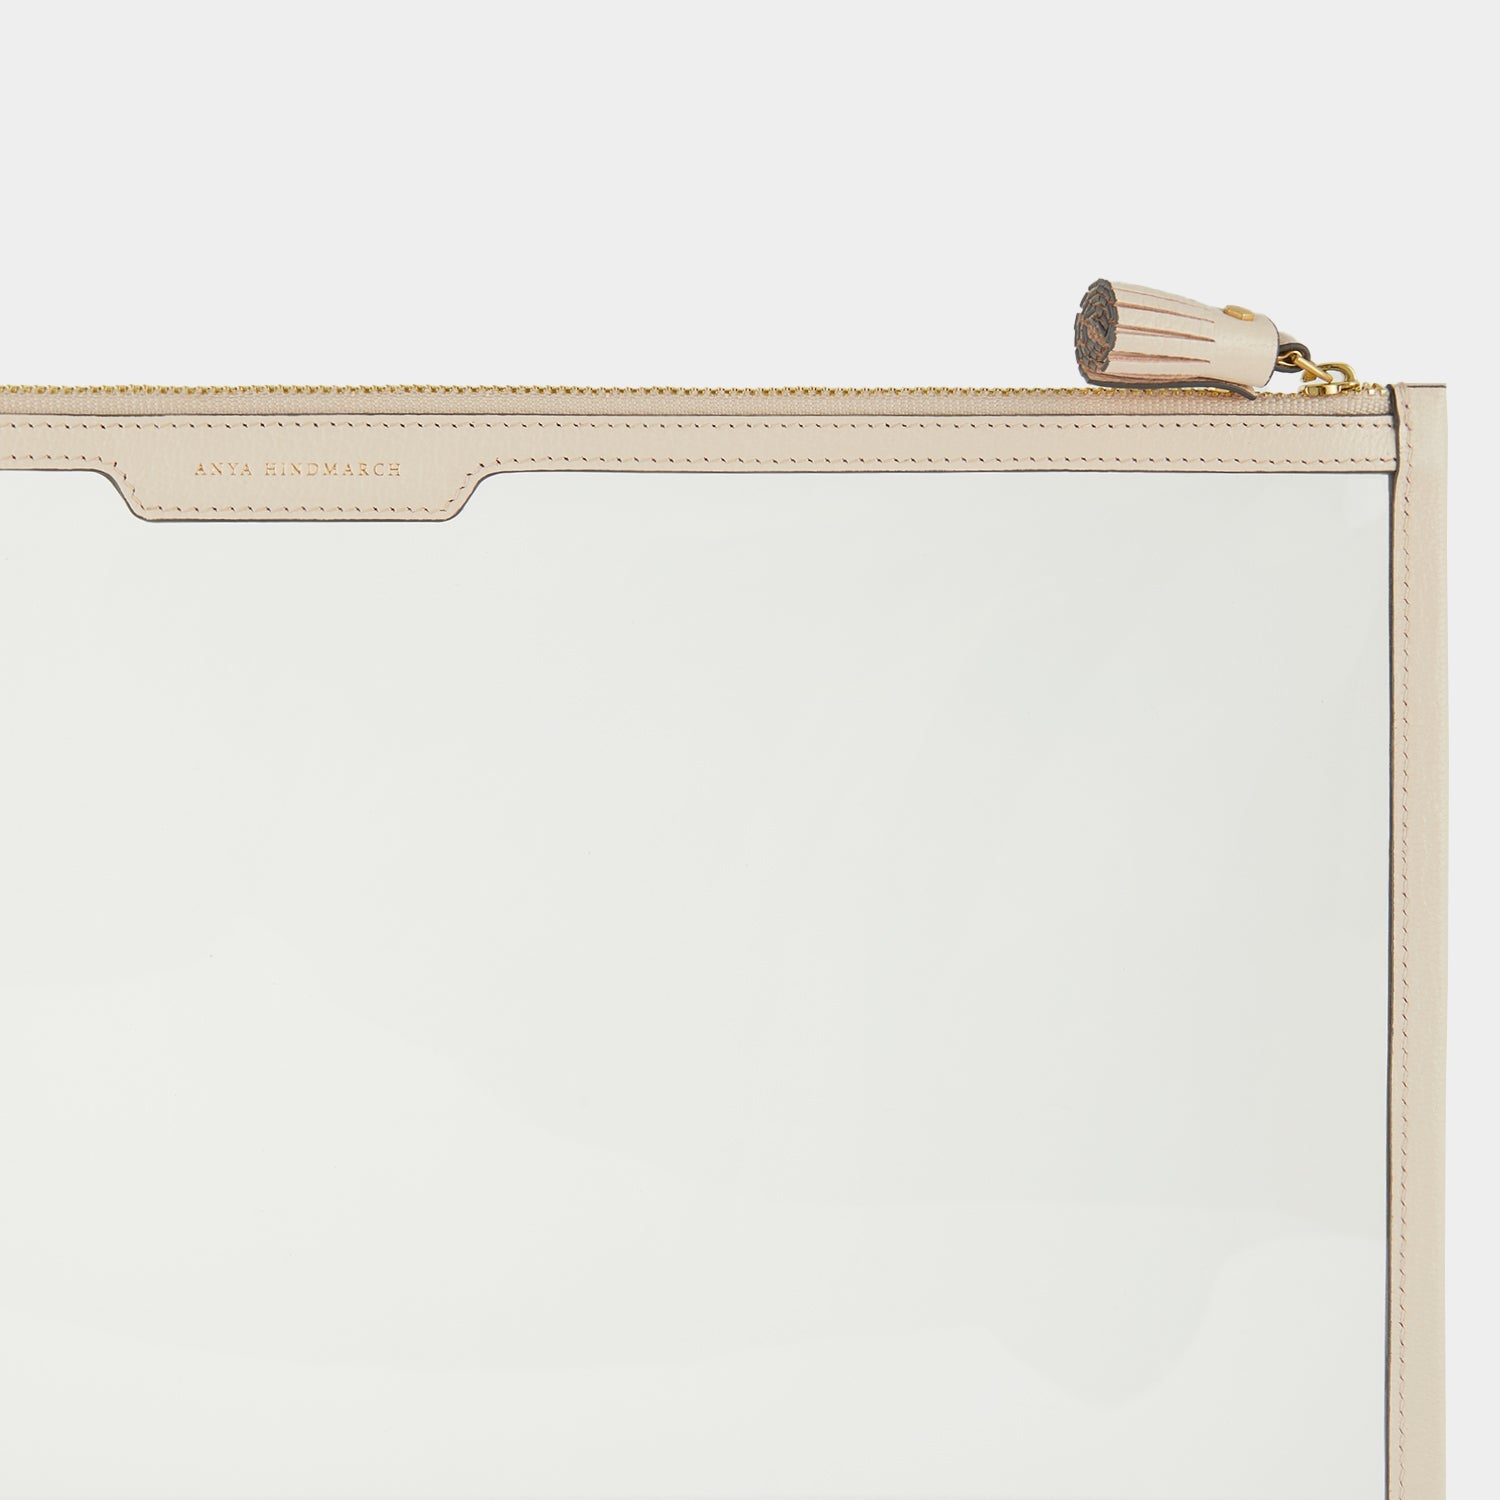 Papers Zip Sleeve -

                  
                    Capra Leather in Light Blush -
                  

                  Anya Hindmarch EU
